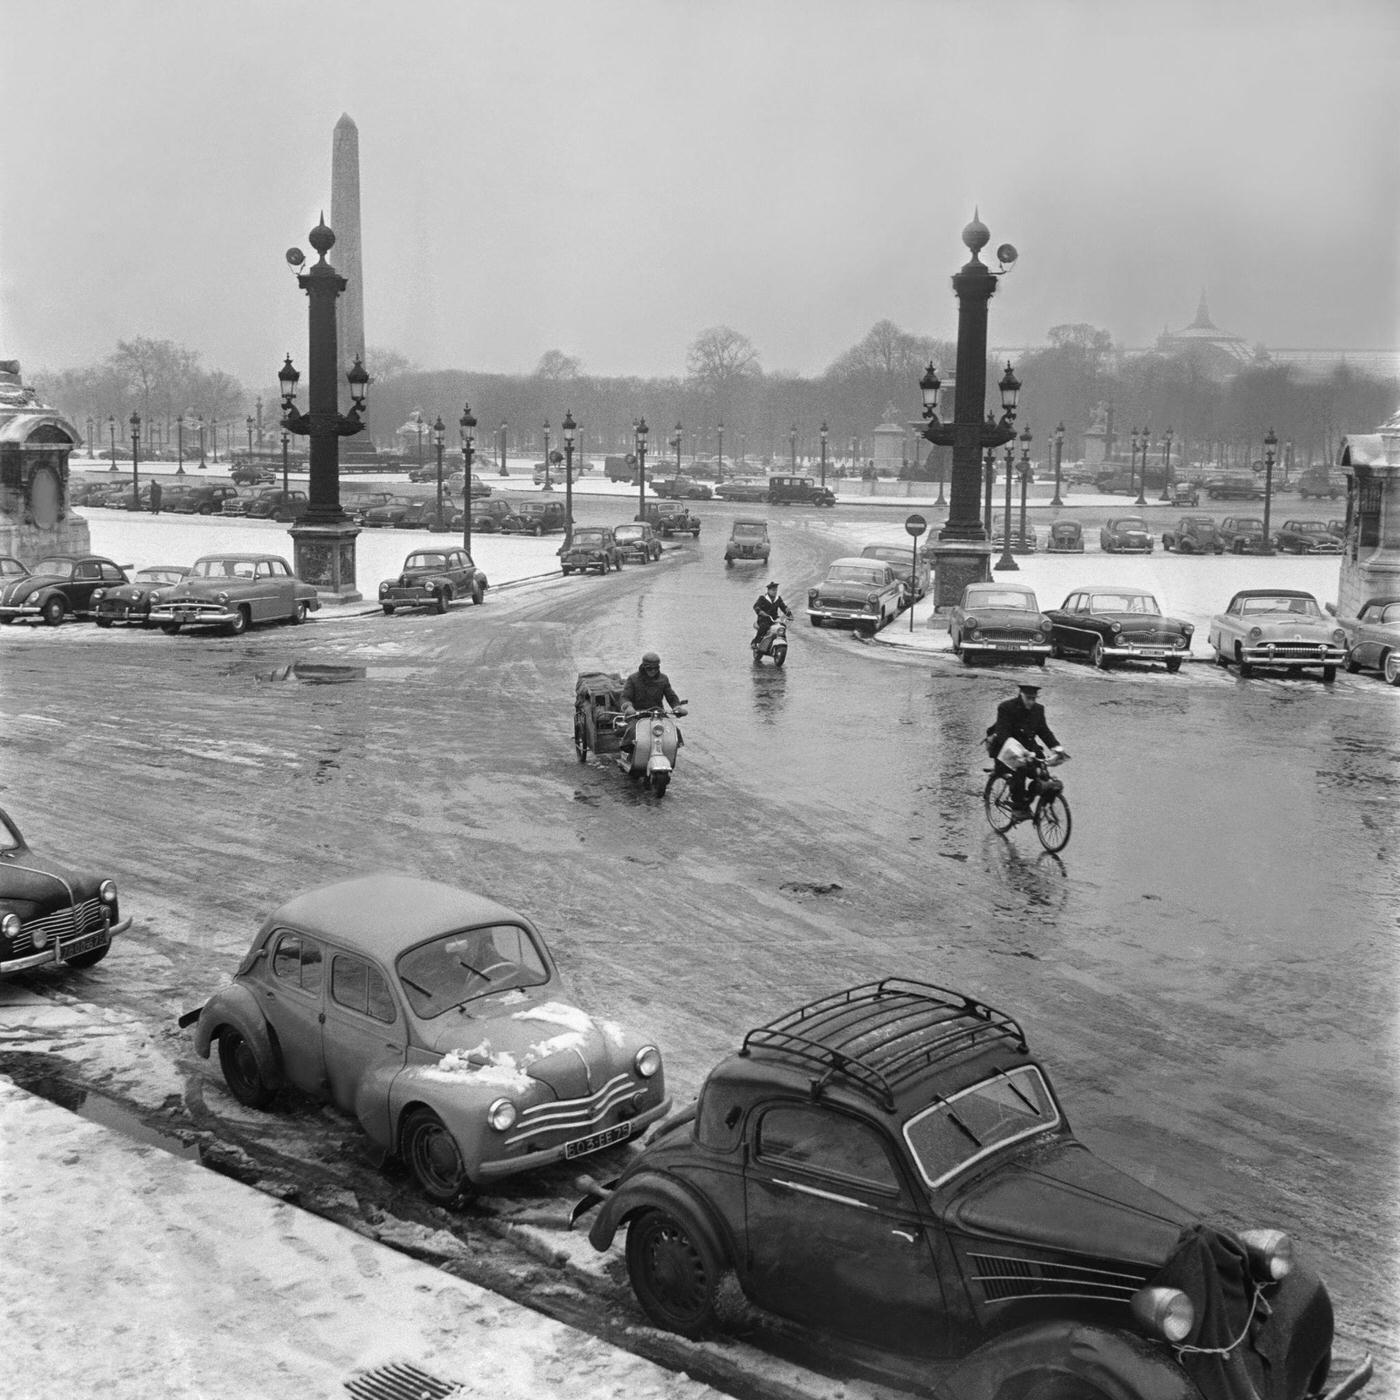 Snowy Concorde Square From The Tuileries Garden, Paris, February 13, 1956.